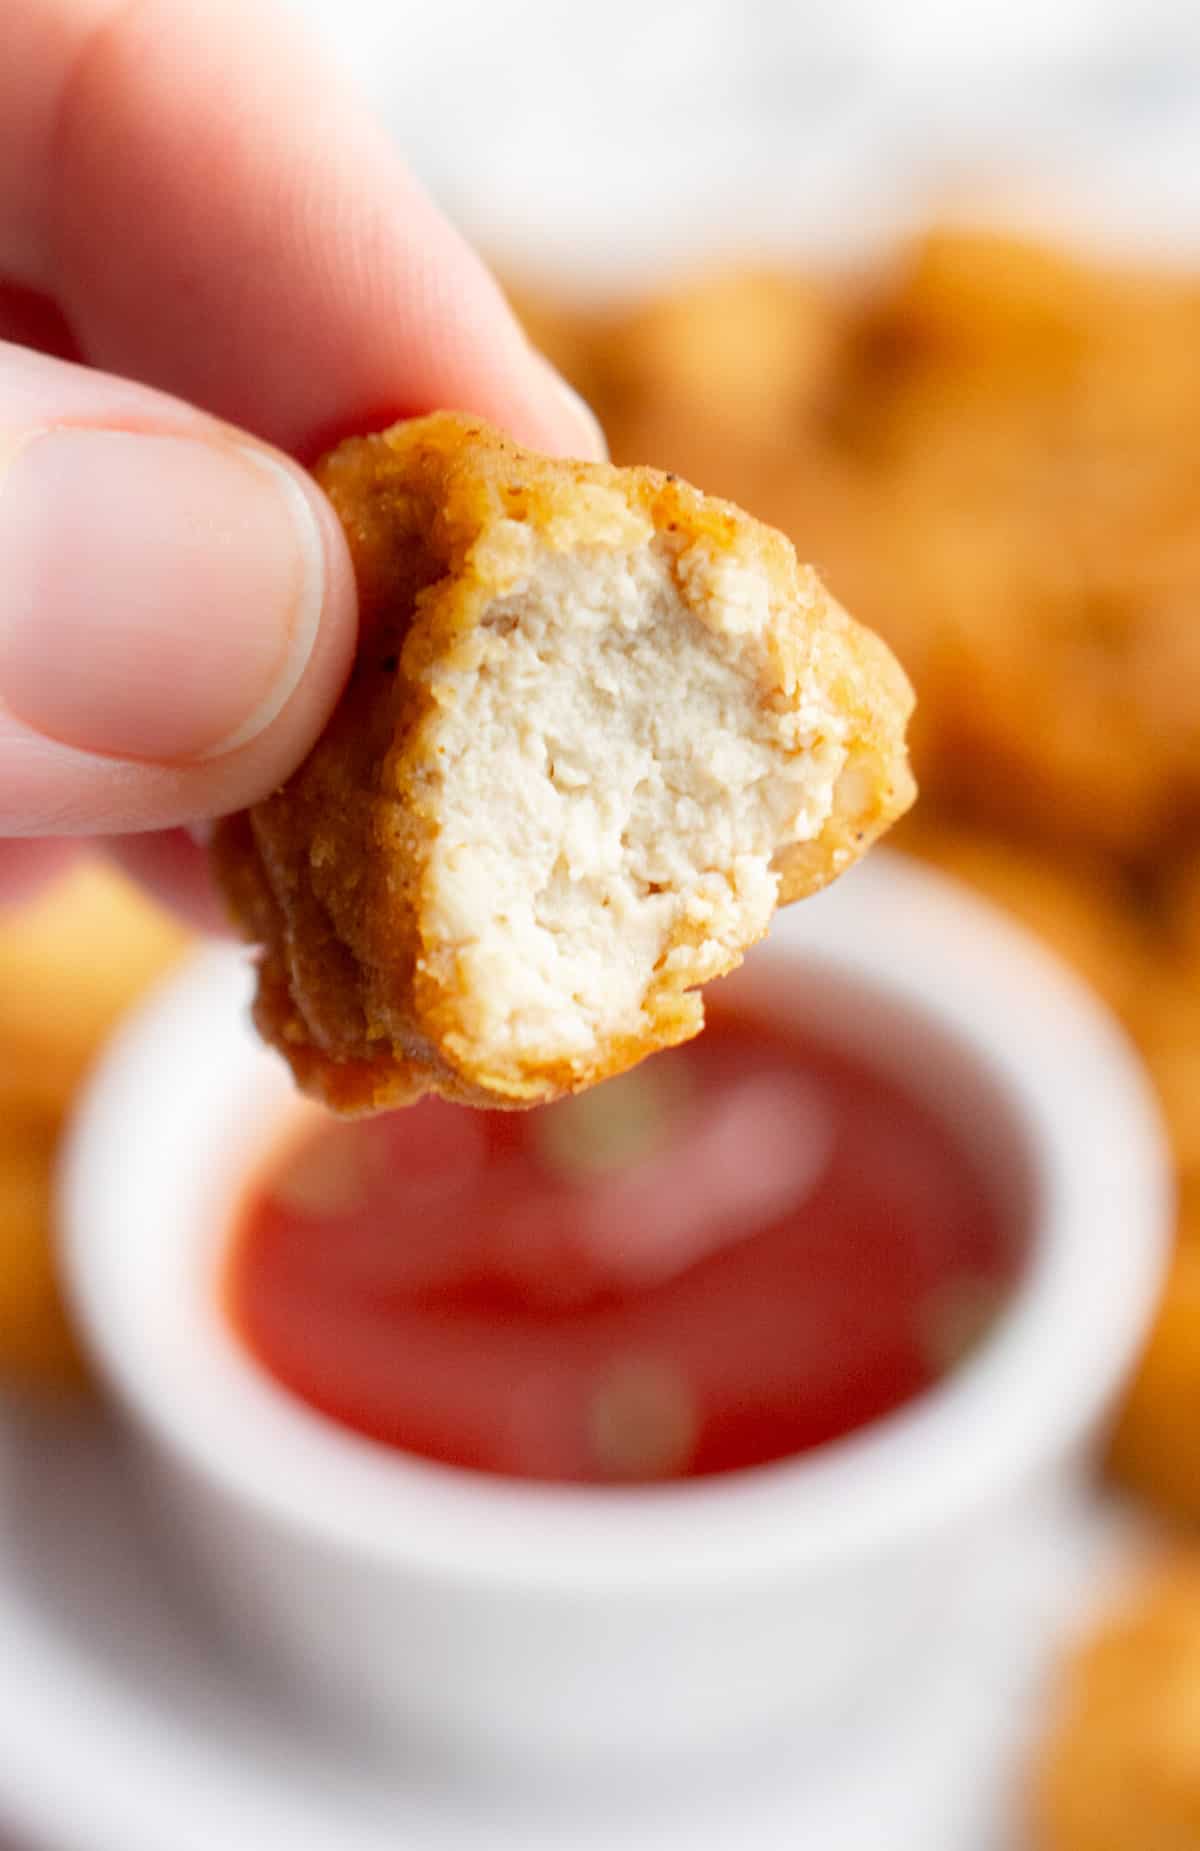 A hand showing the inside of half of a tofu nugget.